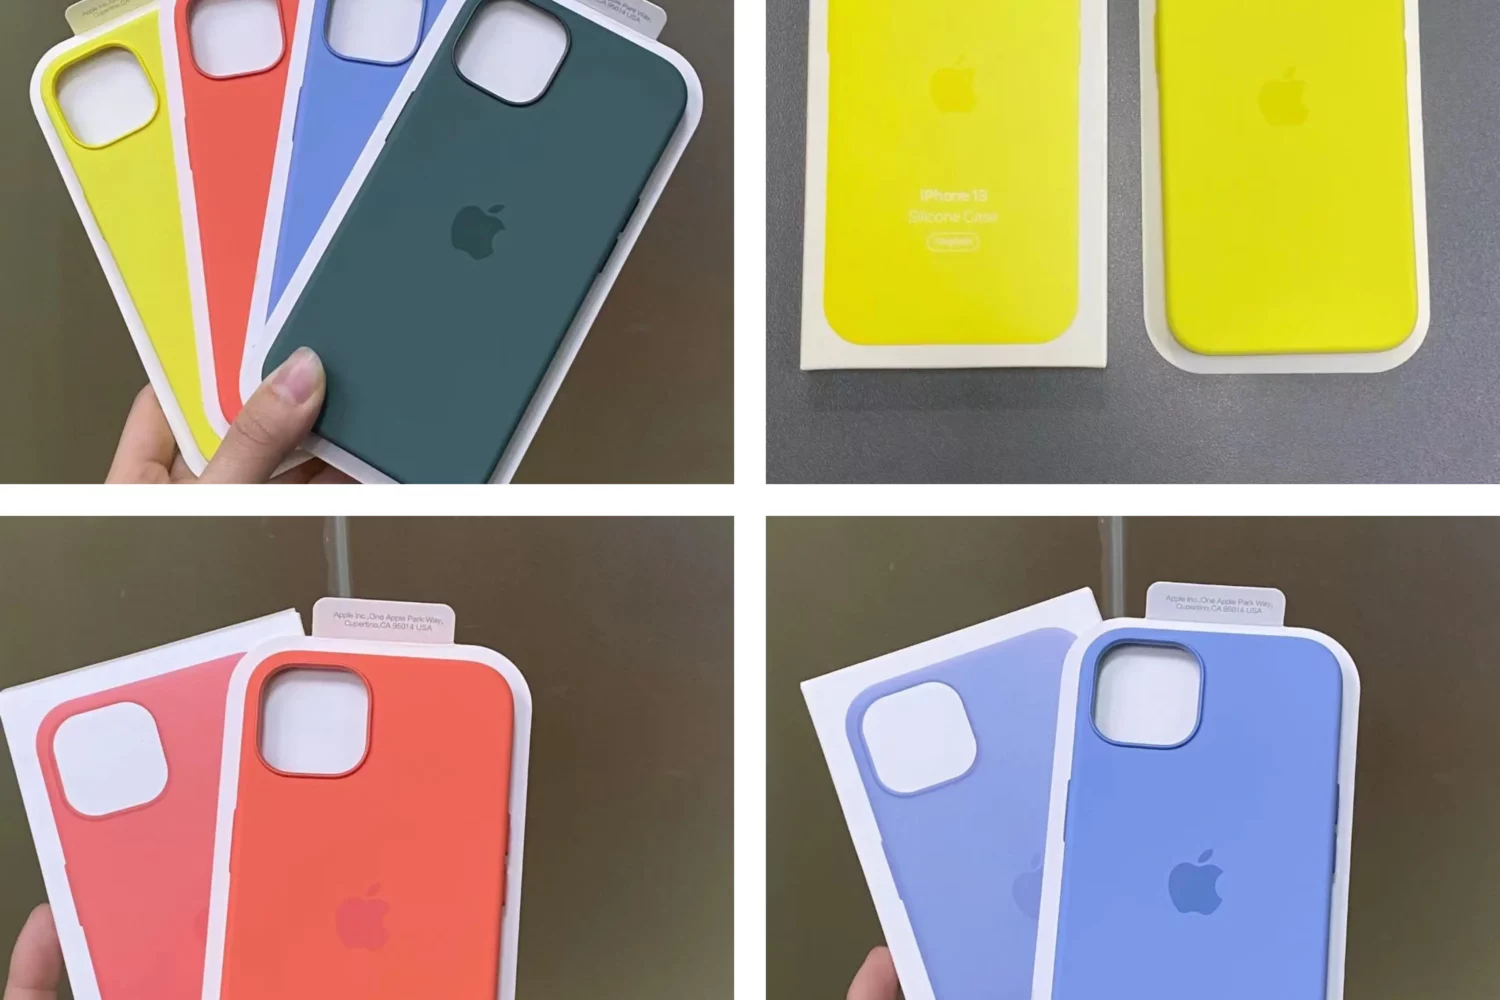 Four images shared in a grid that depict the alleged new spring-themed colors for Apple's MagSafe cases for the iPhone 13 family